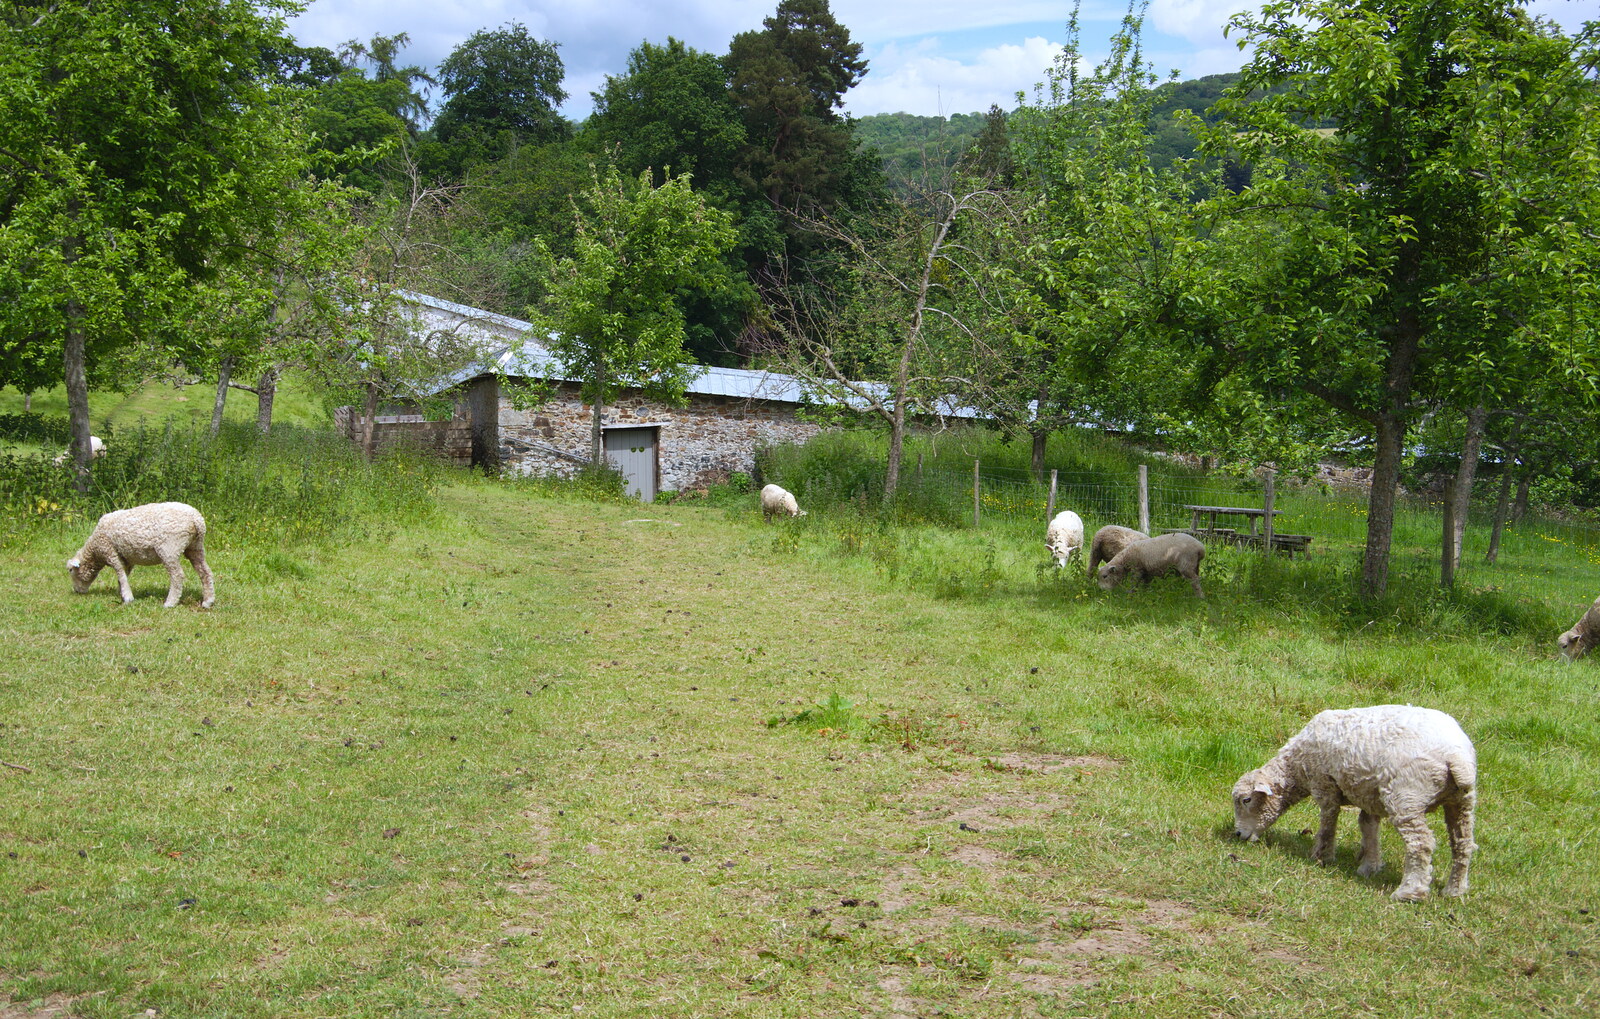 Chagford Lido and a Trip to Parke, Bovey Tracey, Devon - 25th May 2019: Sheep in a small paddock